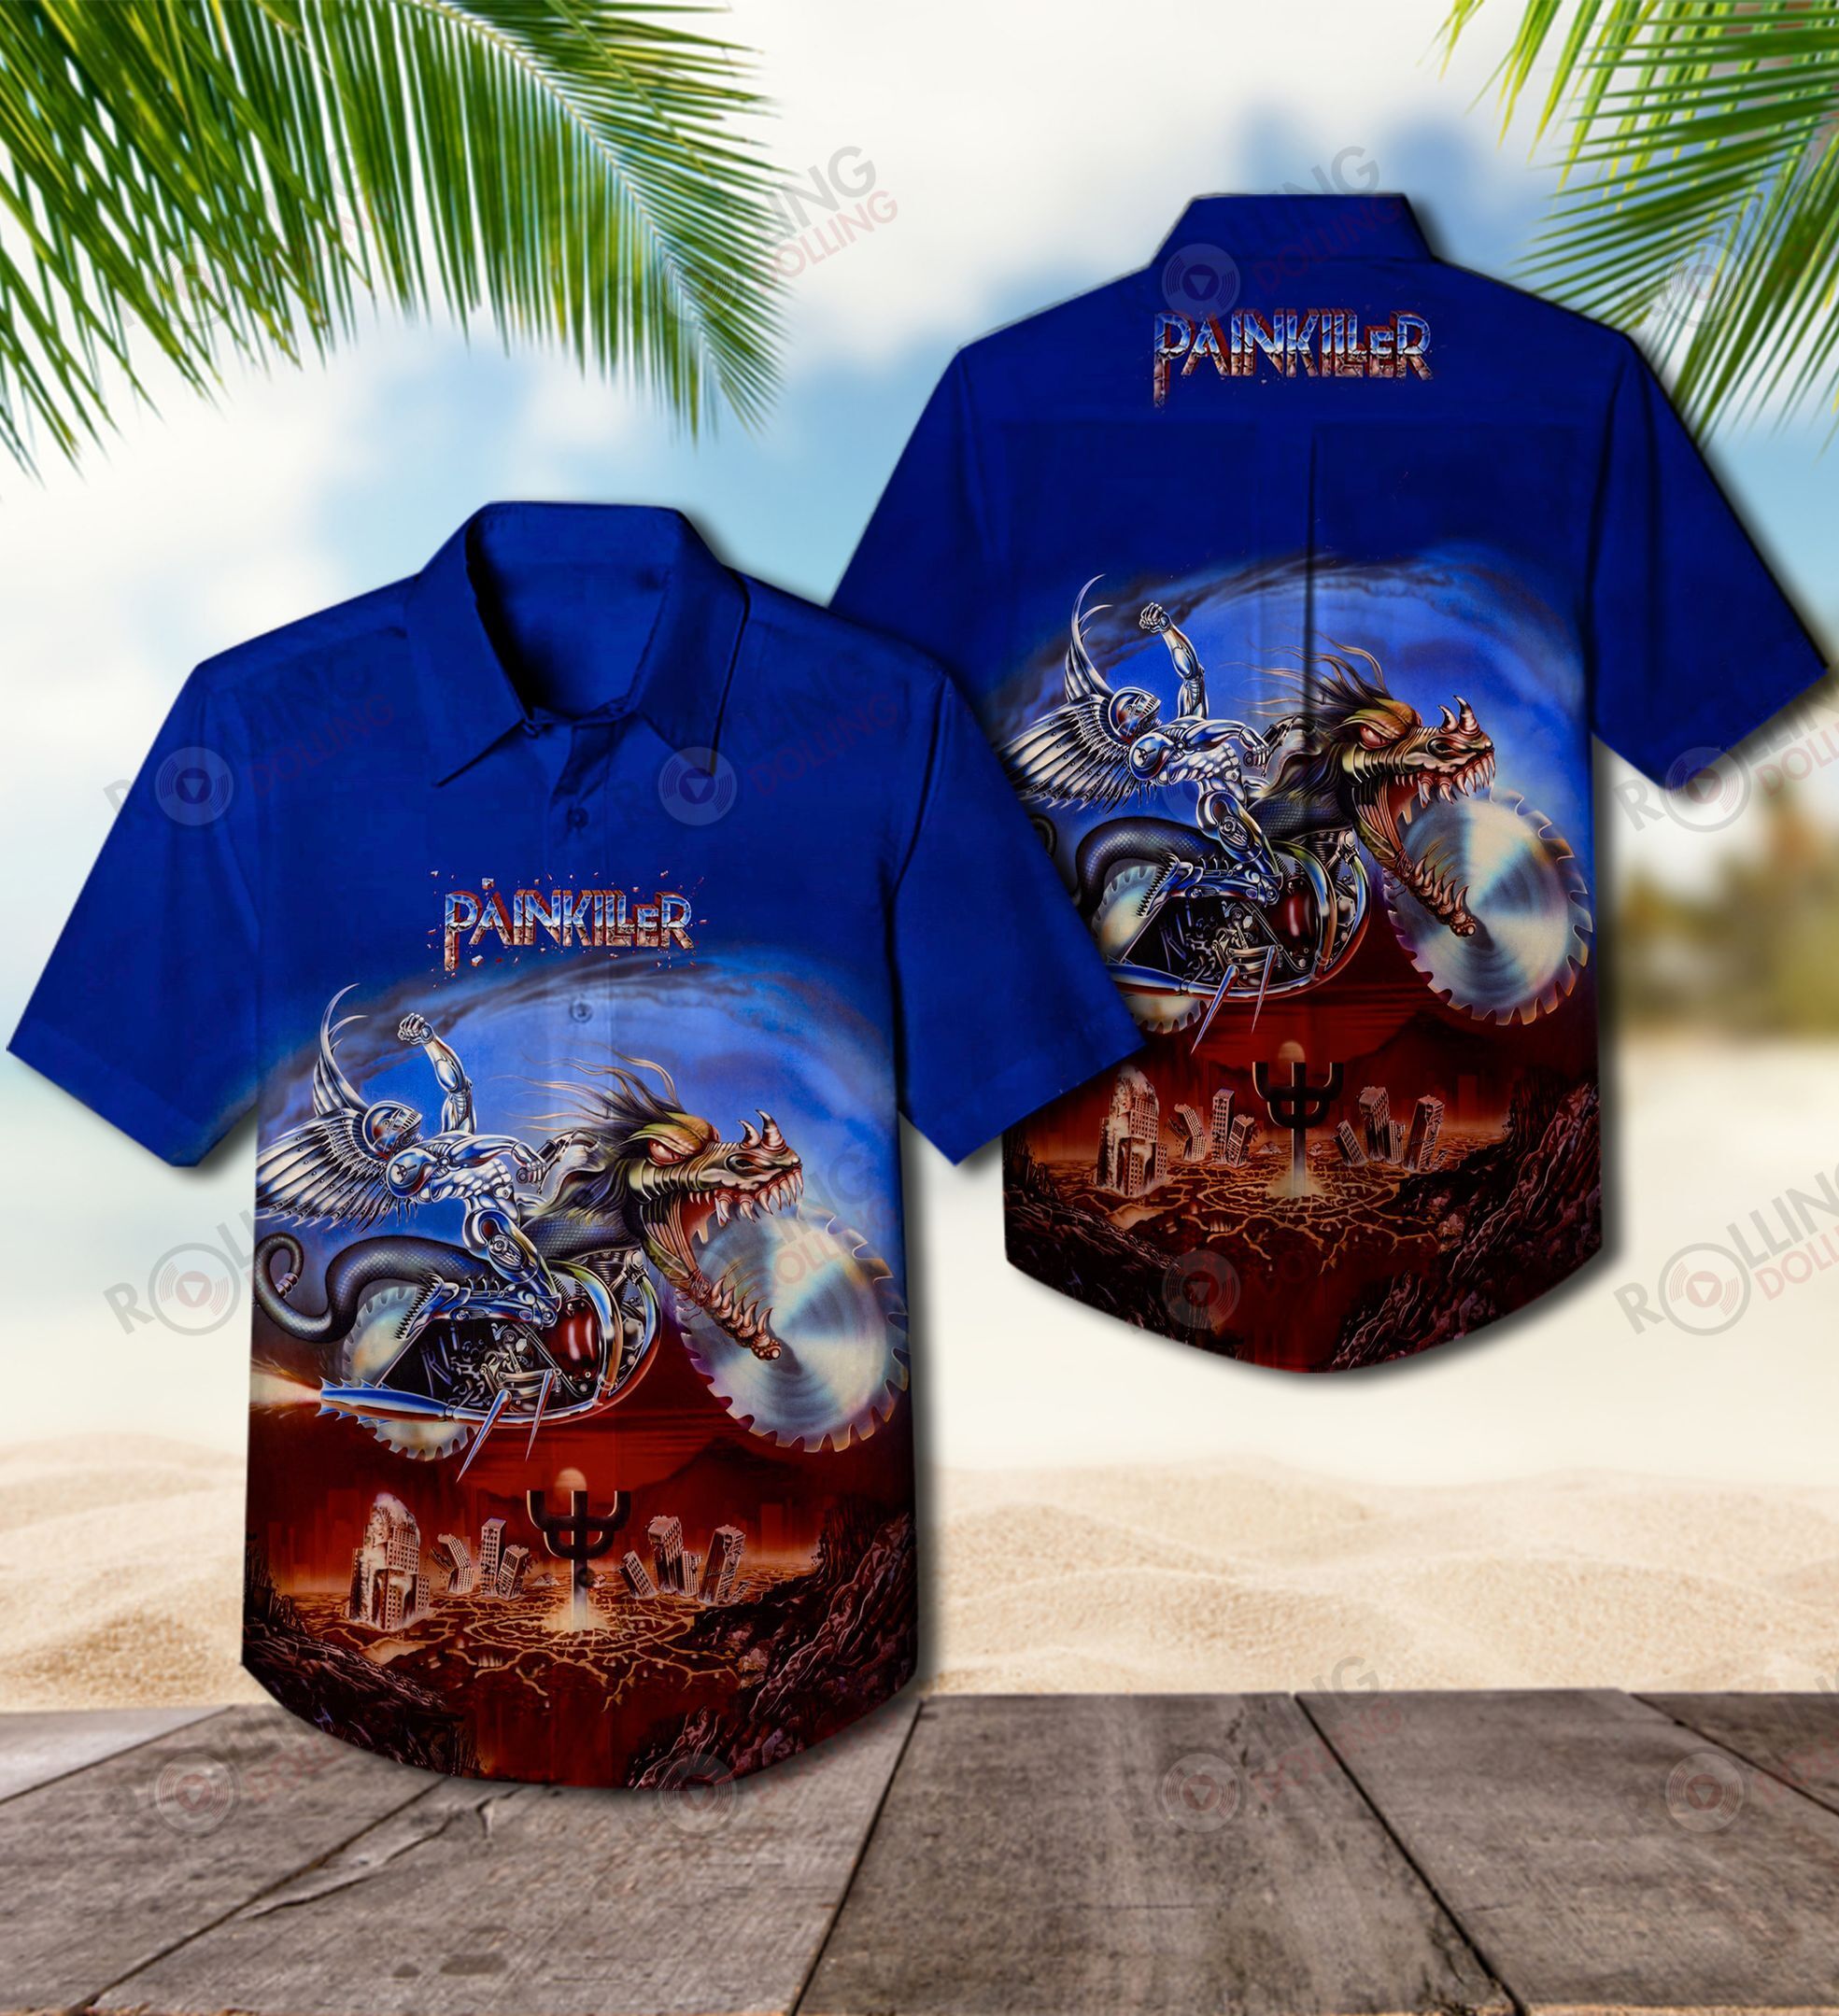 This would make a great gift for any fan who loves Hawaiian Shirt as well as Rock band 107